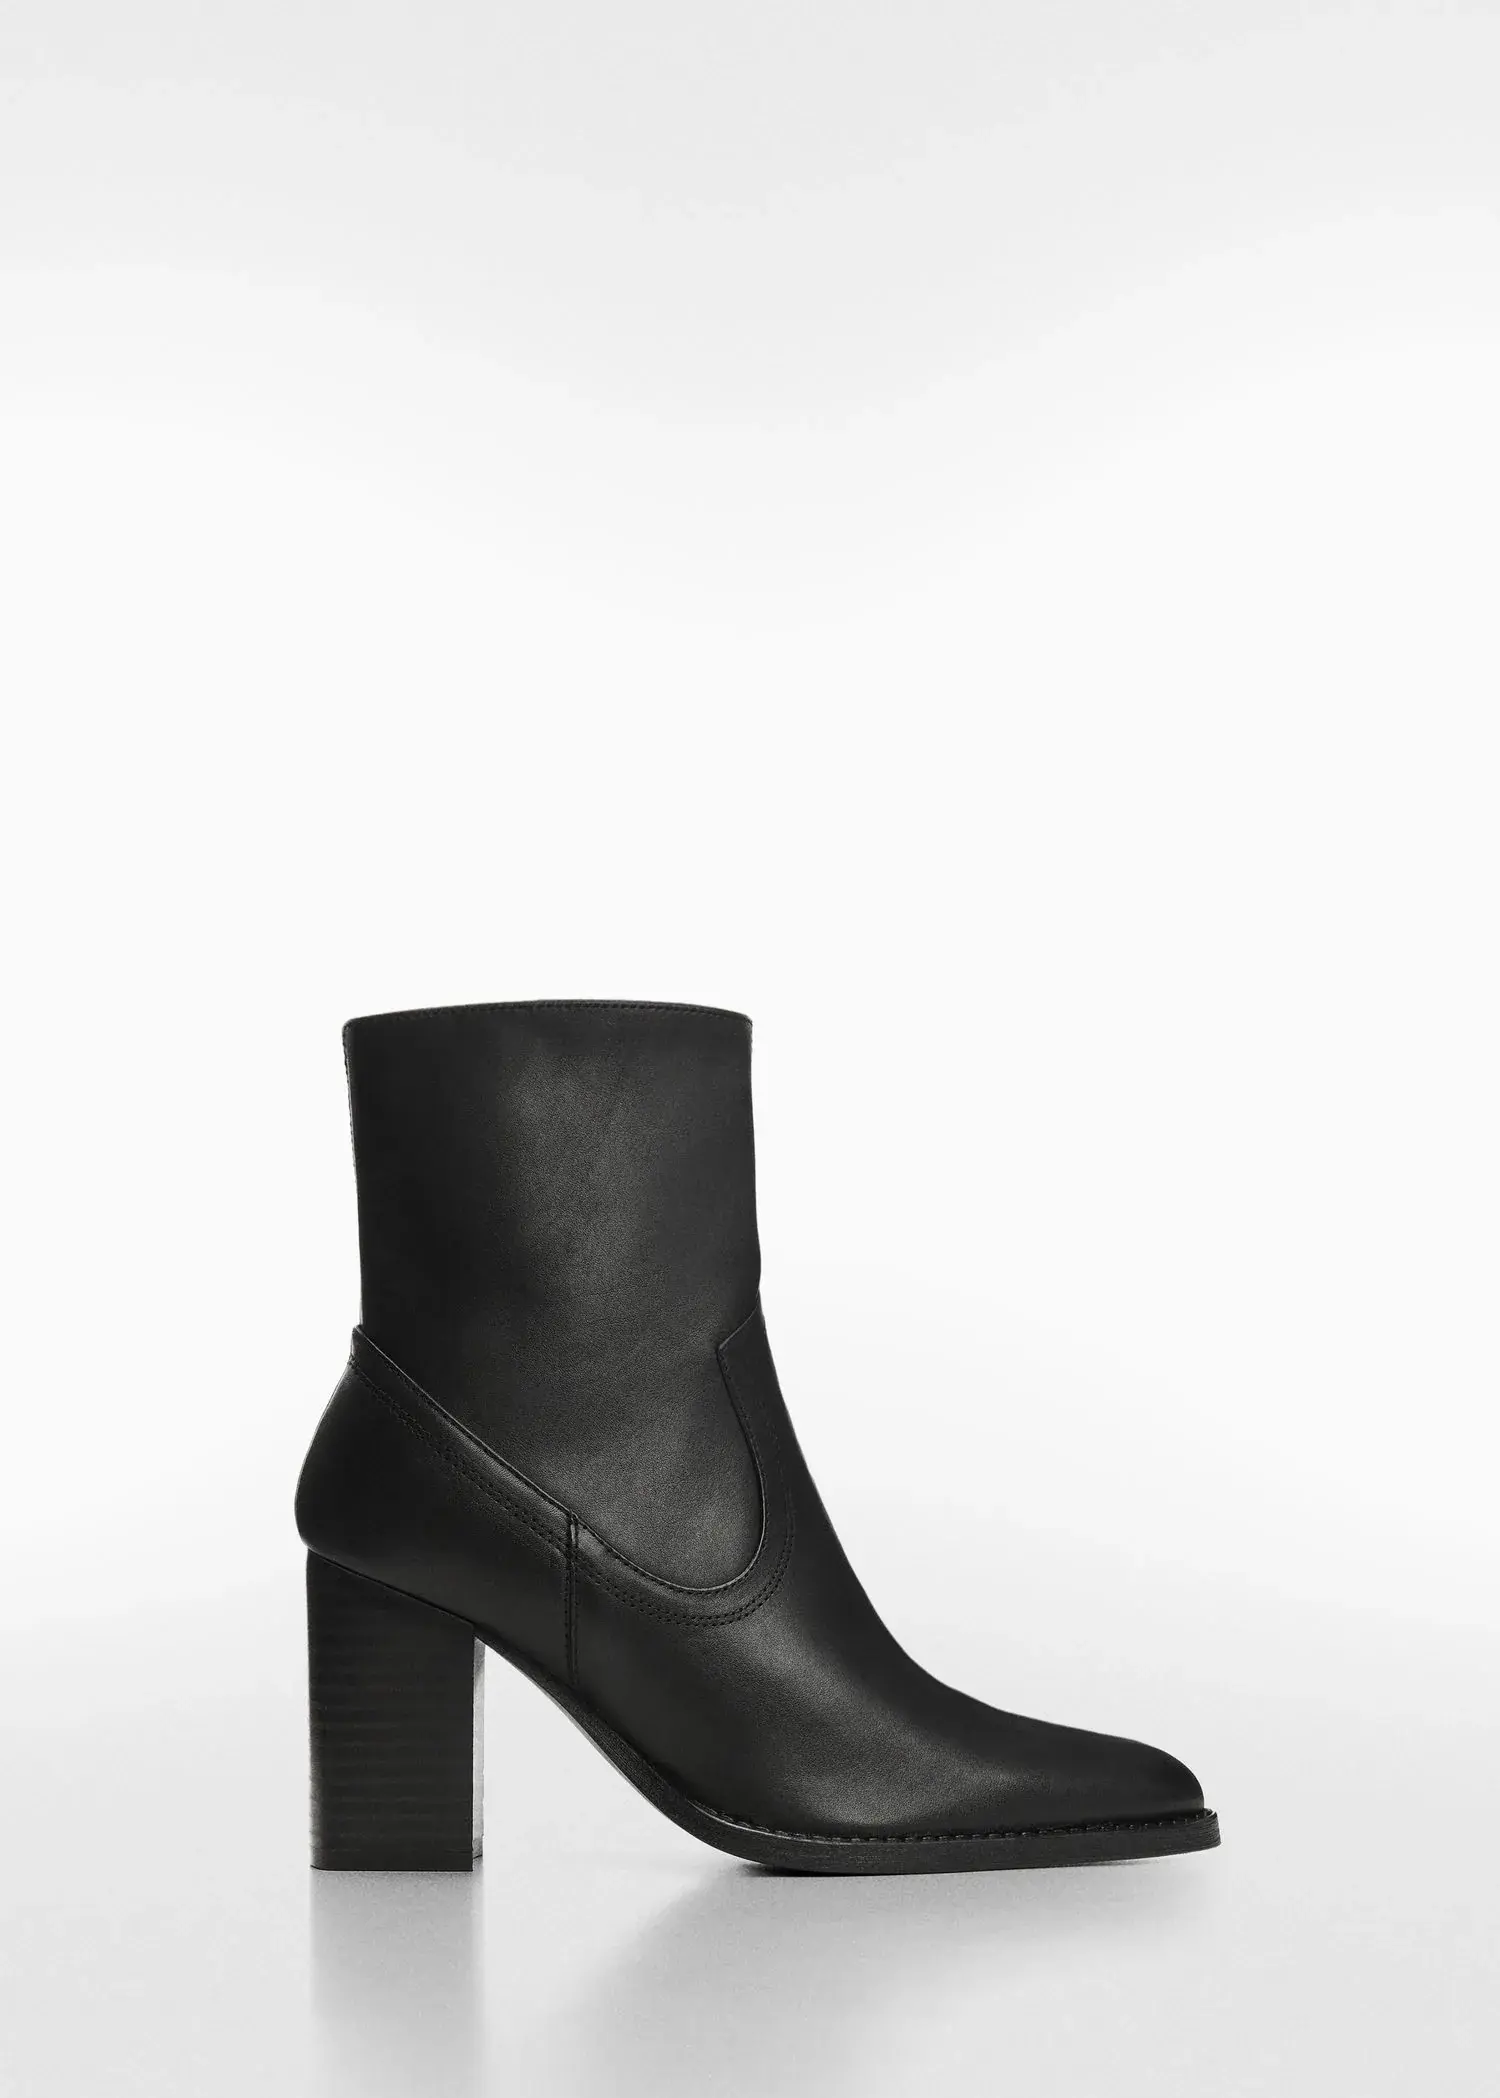 Mango Leather ankle boots with block heel. 1